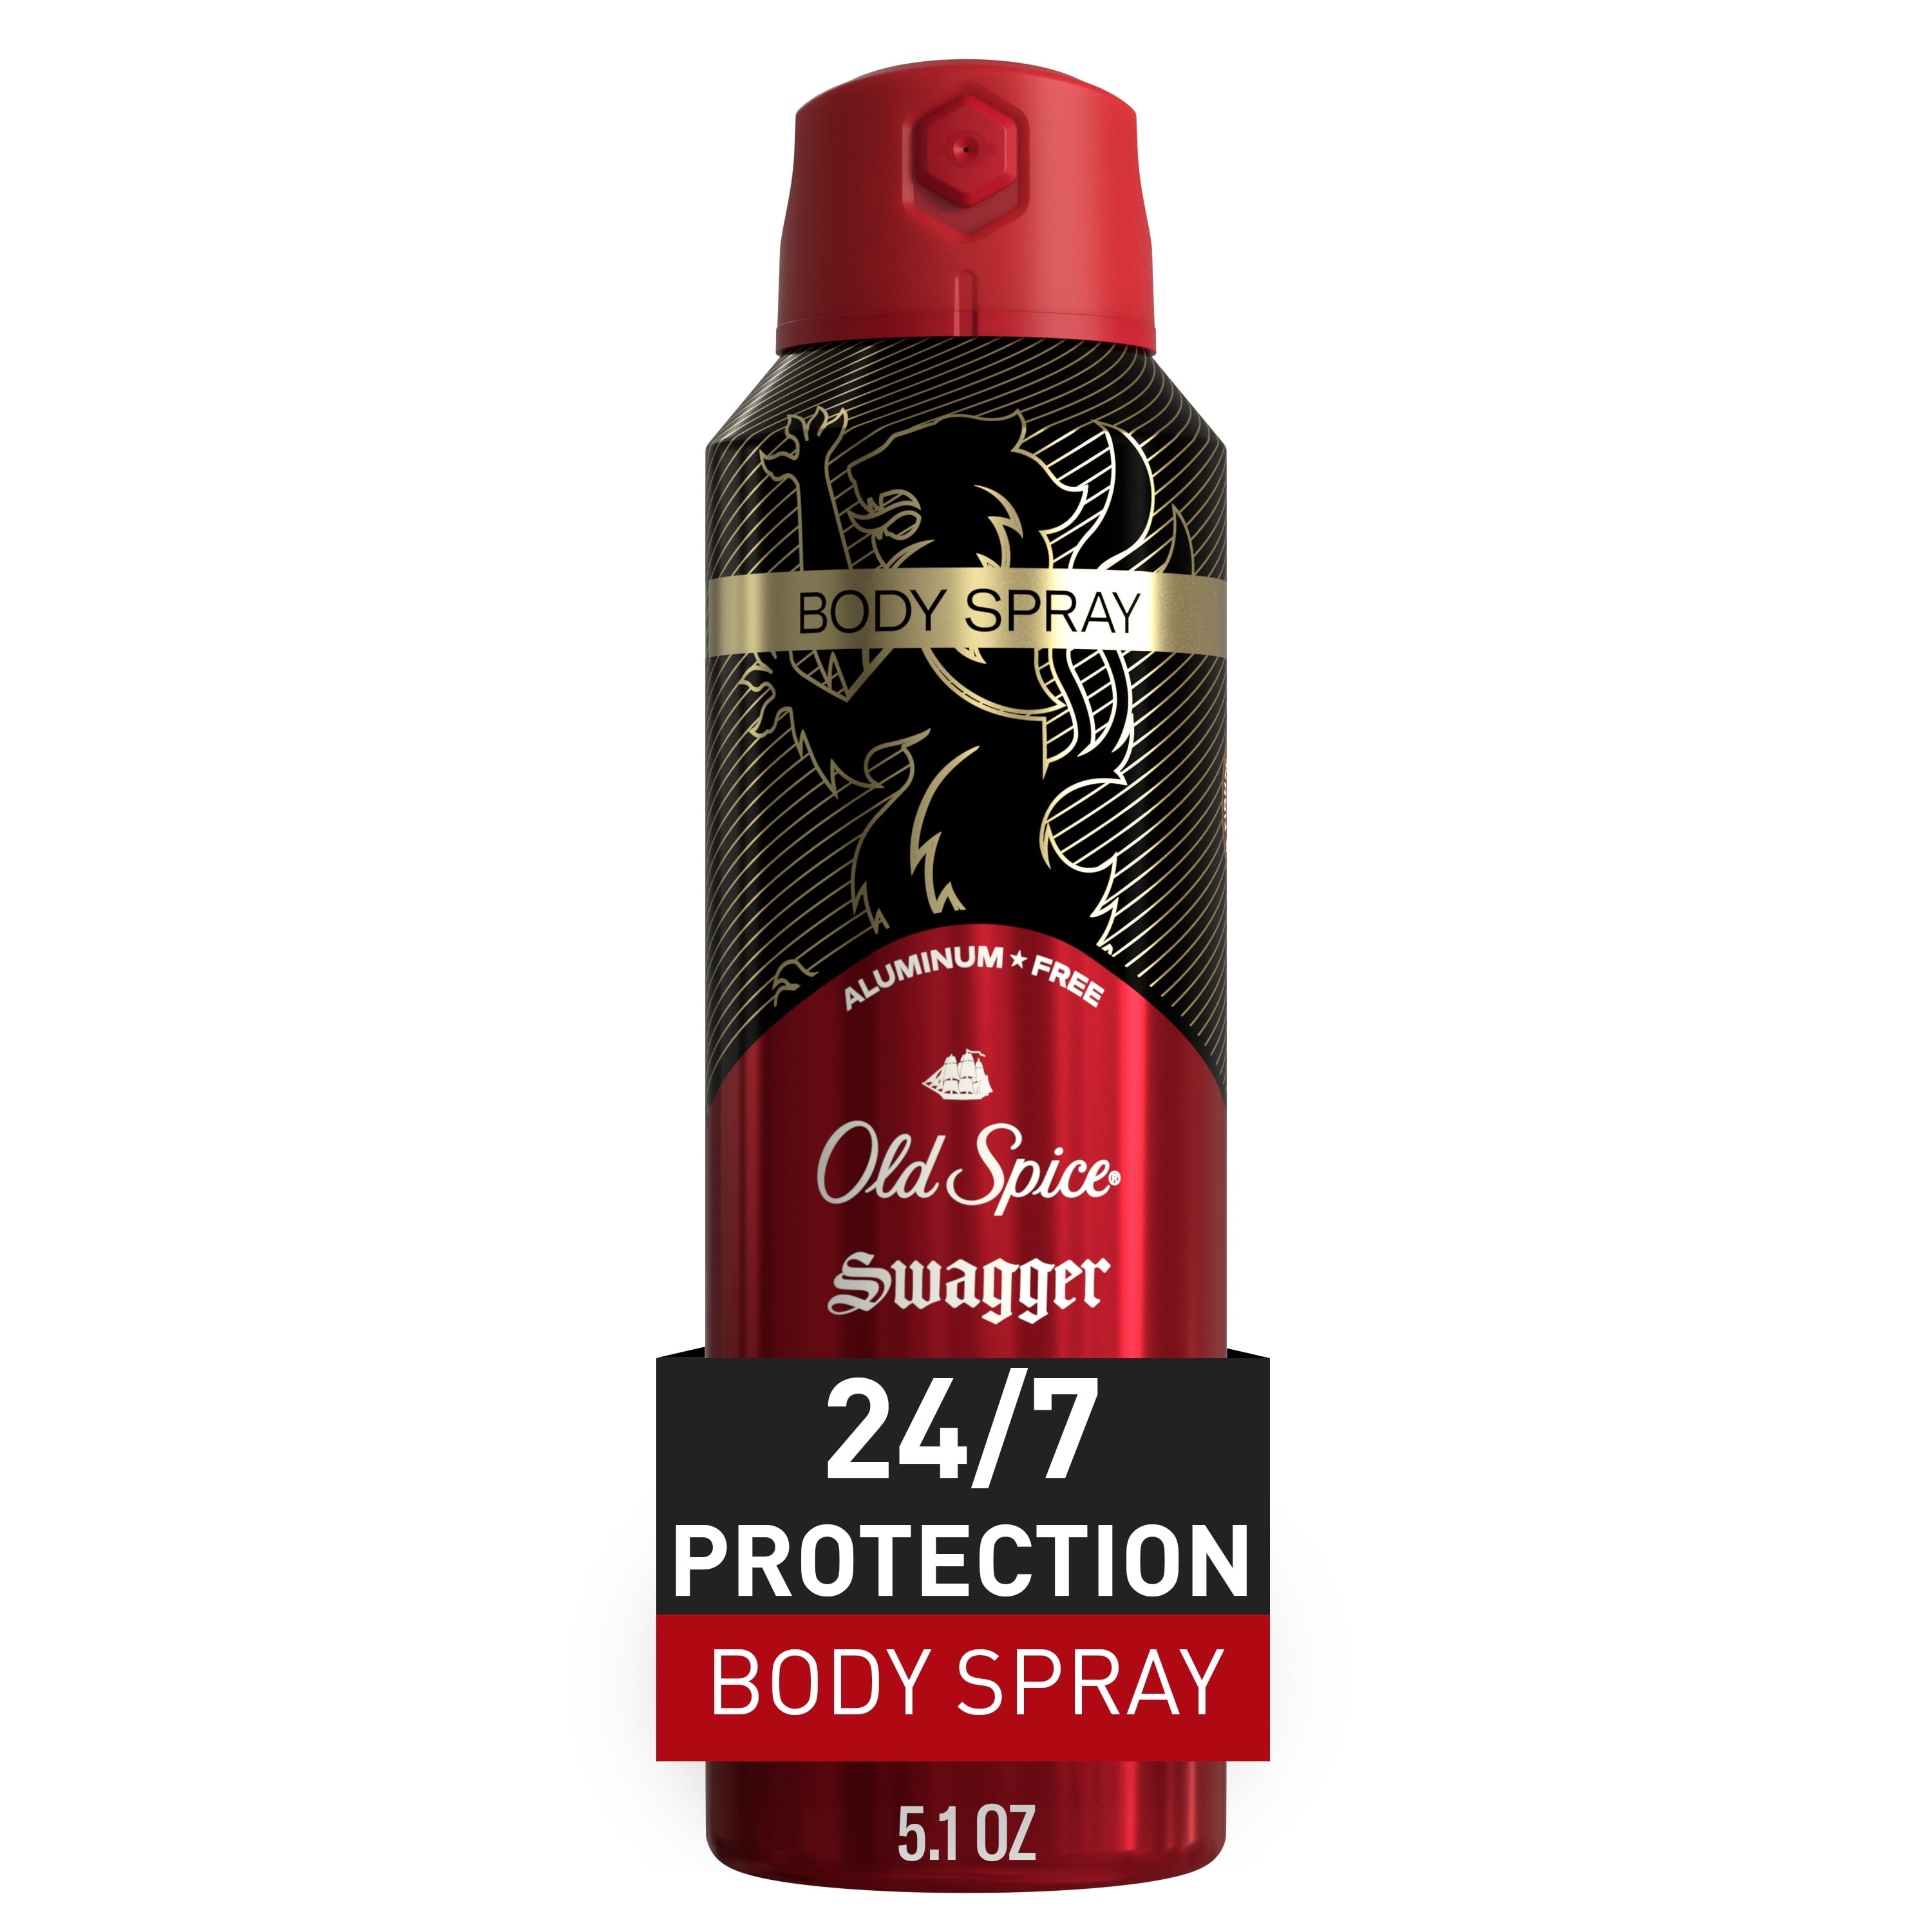 Old Spice Aluminum Free Body Spray for Men, Swagger, 5.1 oz 